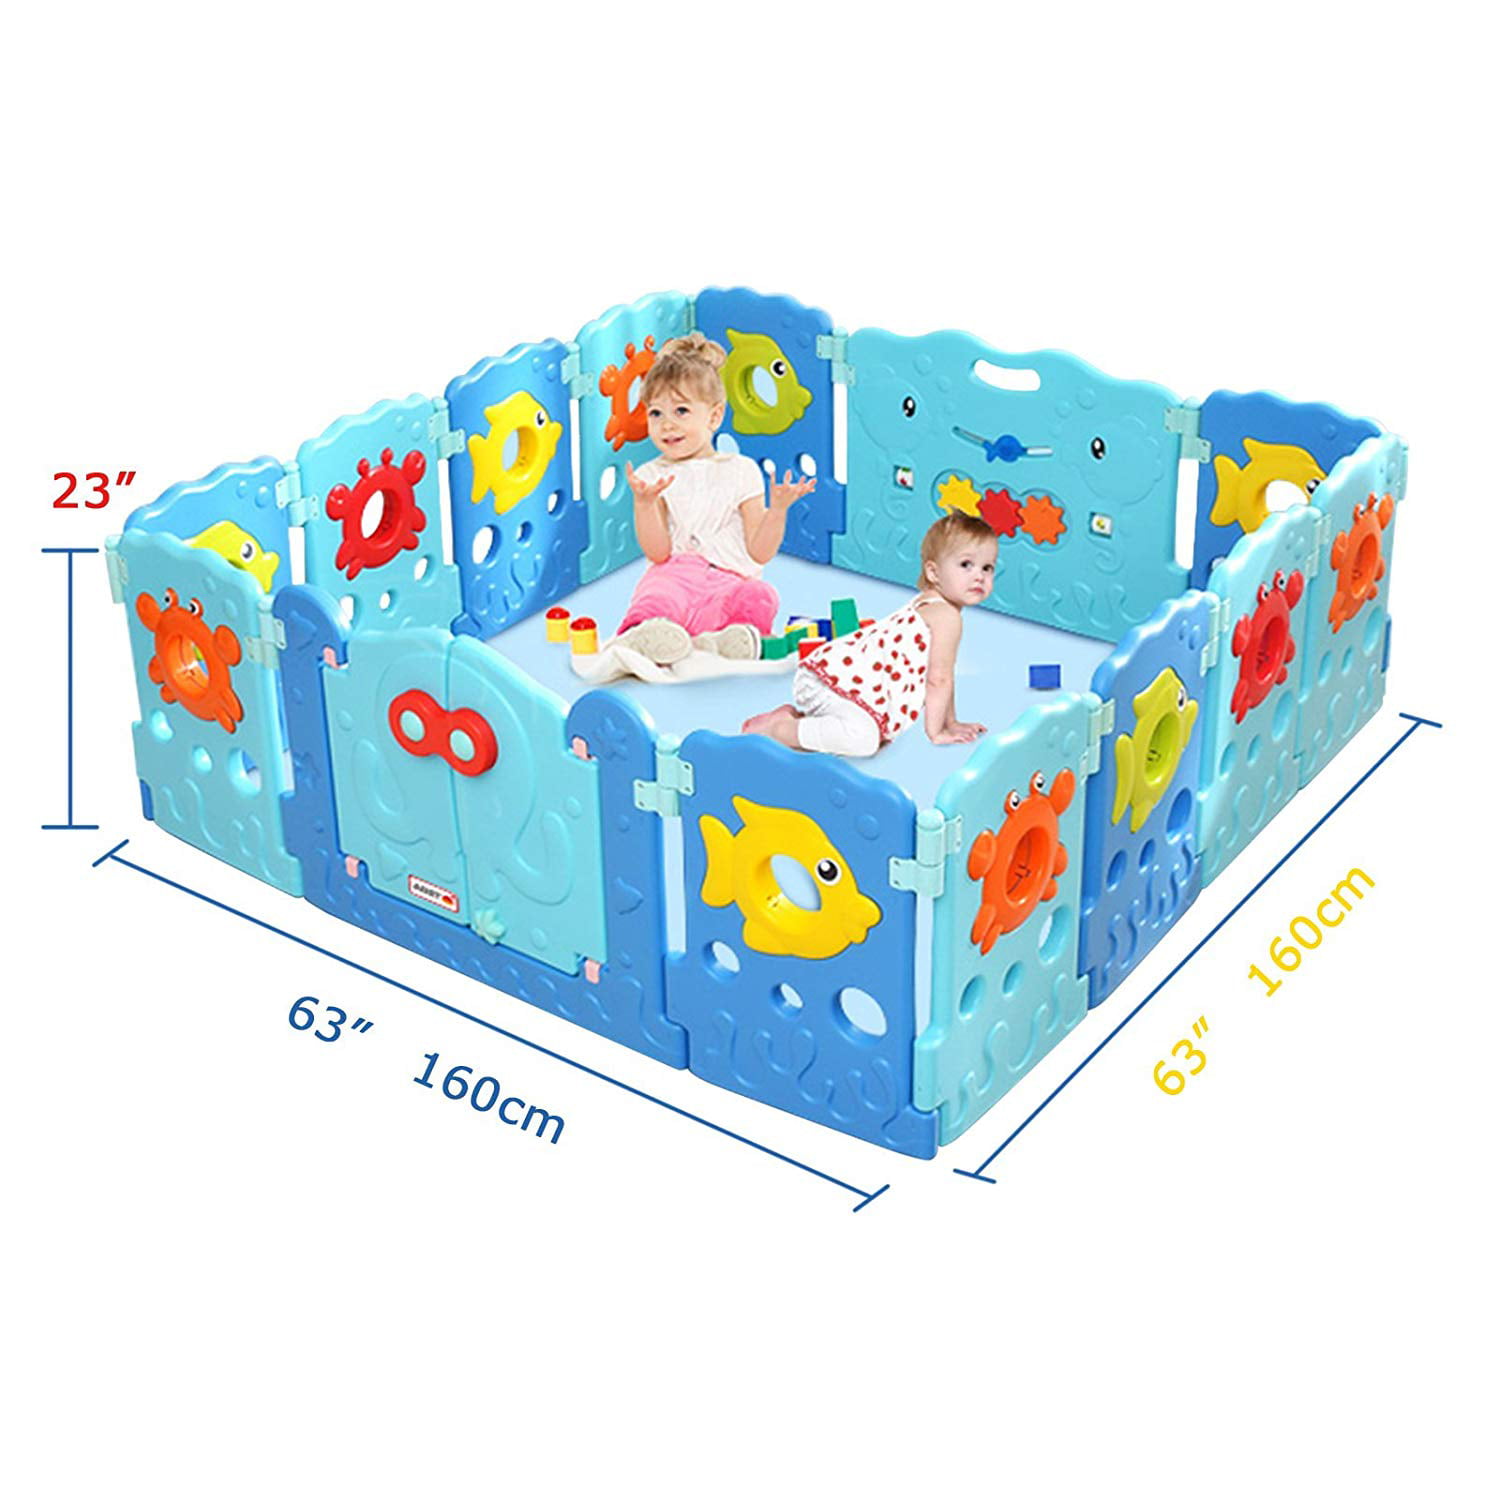 14 Panel Baby Playpen - Kids Safety Playard Activity Centre, Home Indoor  Outdoor - Sea World Theme